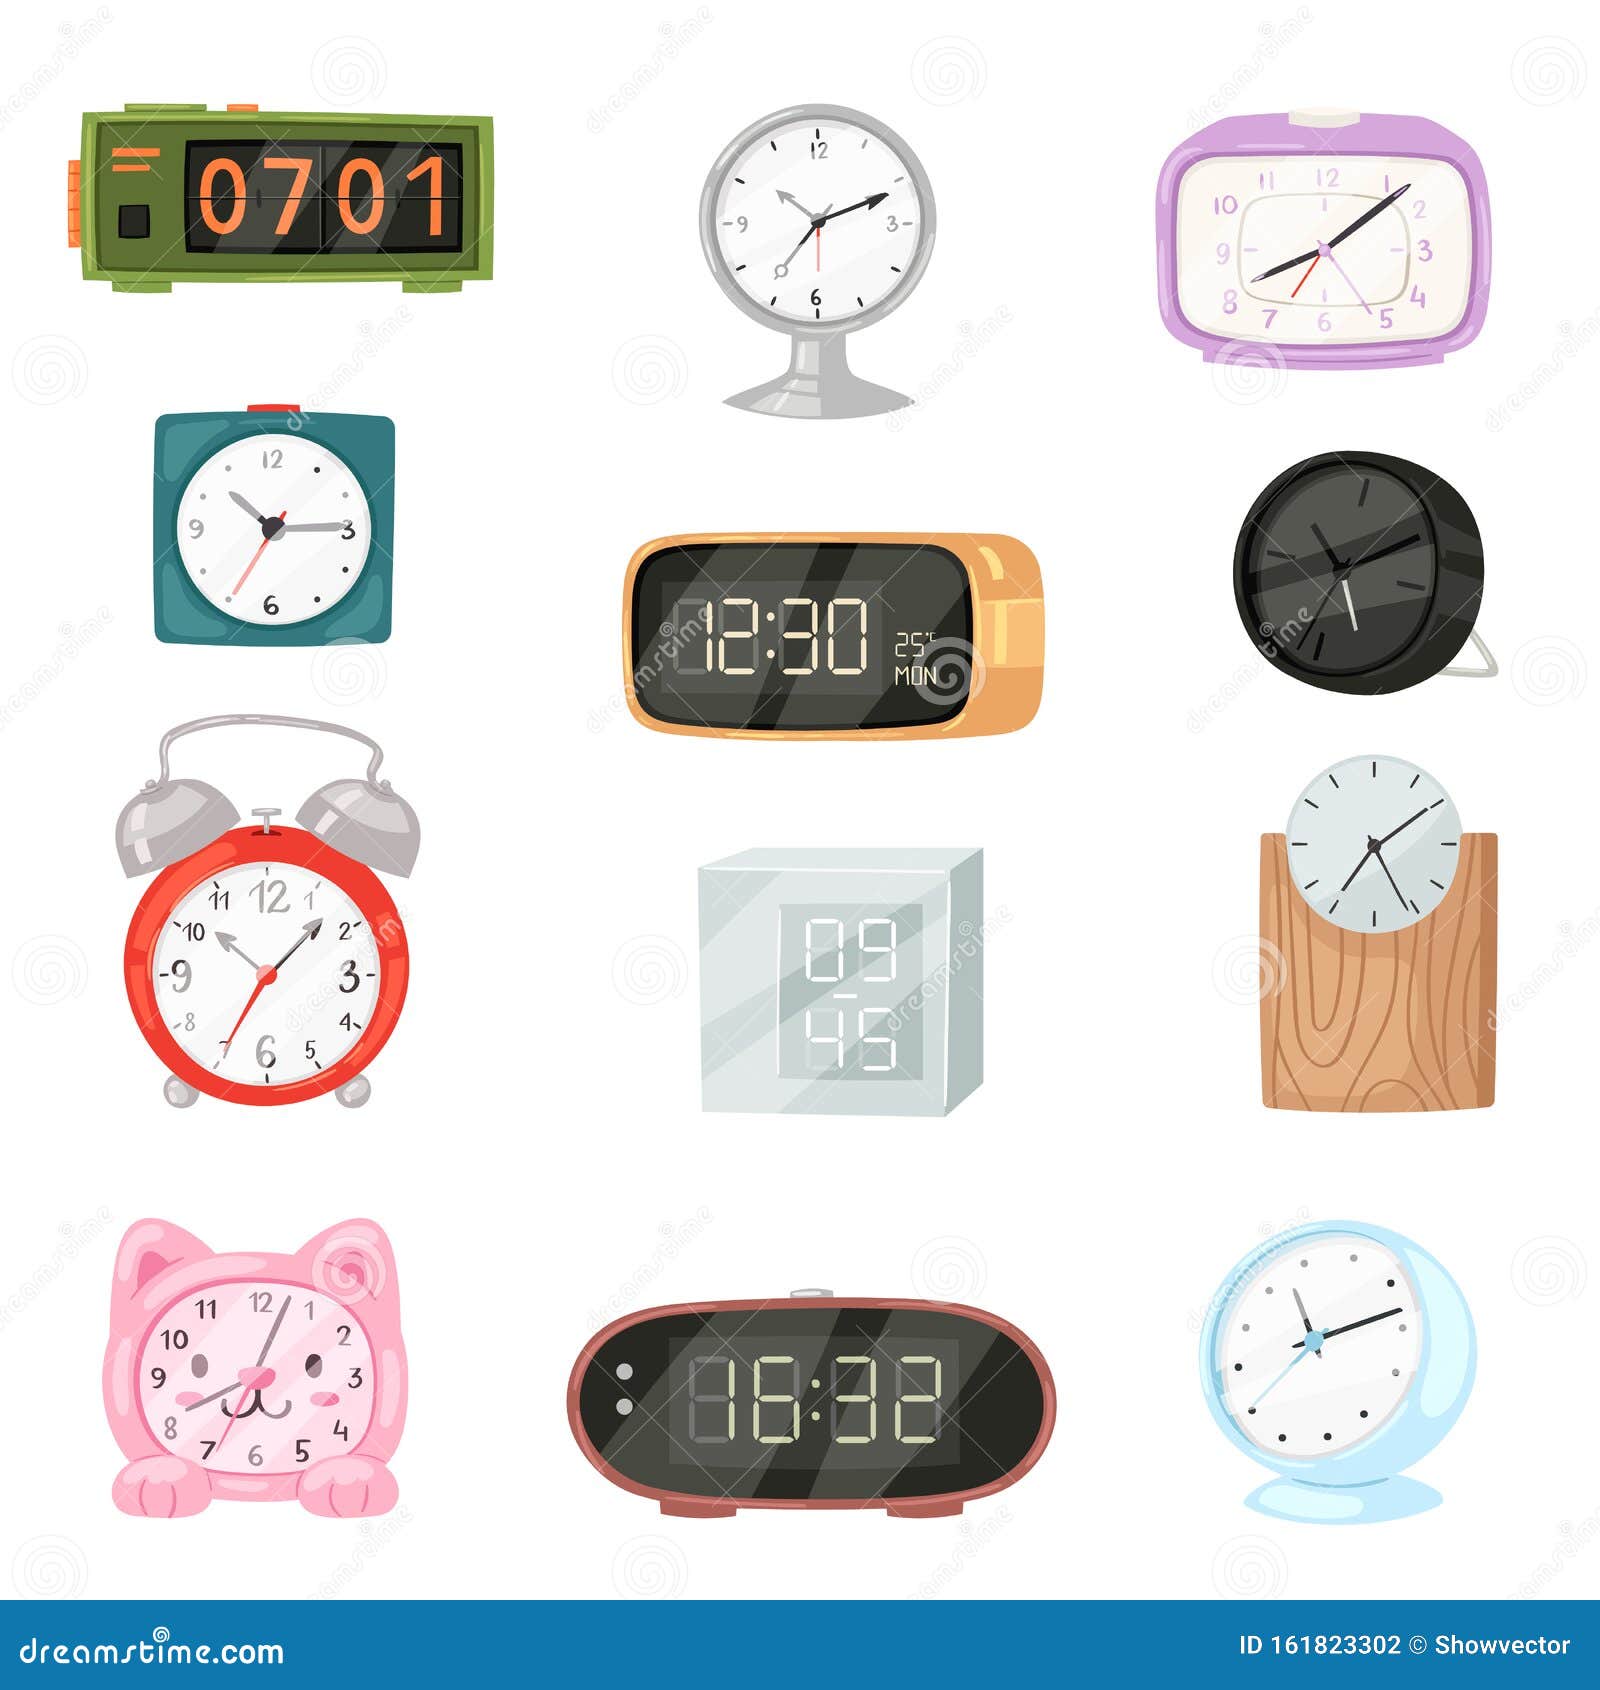 alarm clock  modern clockface clocked in time with hour or minute arrows  childish clocking object